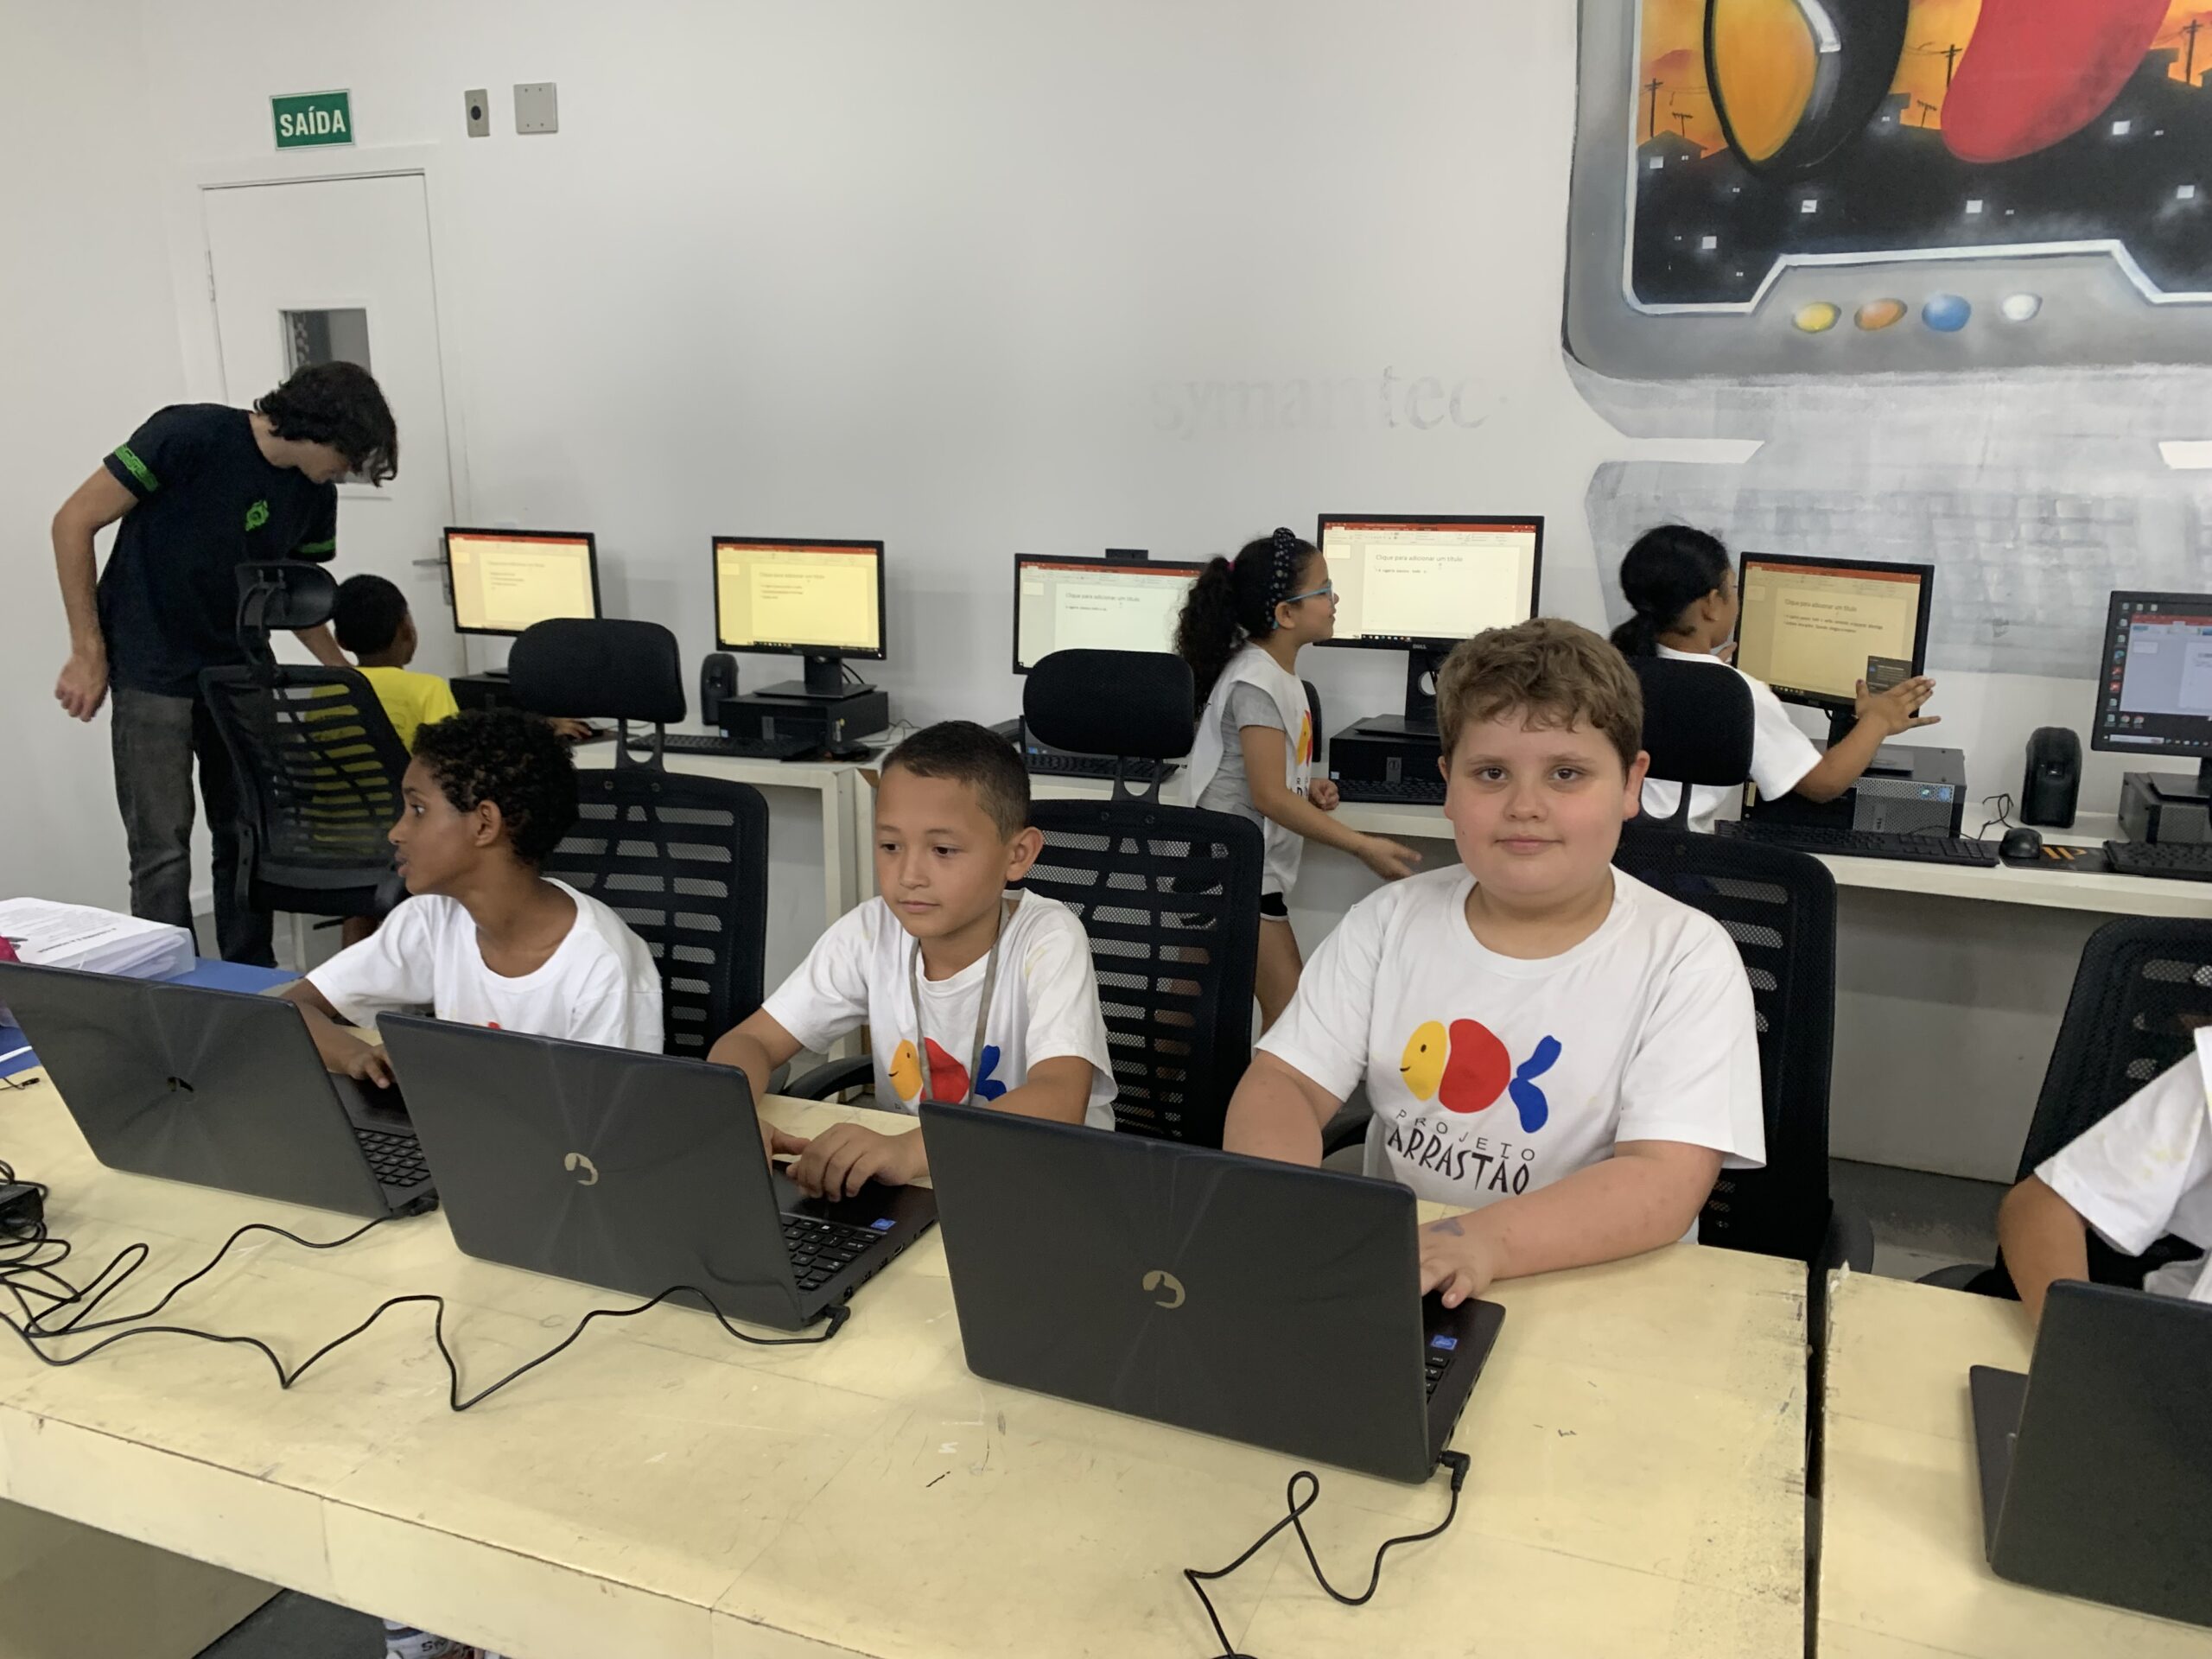 Students from Arrastão Projecto in São Paulo, Brazil in a computer lab